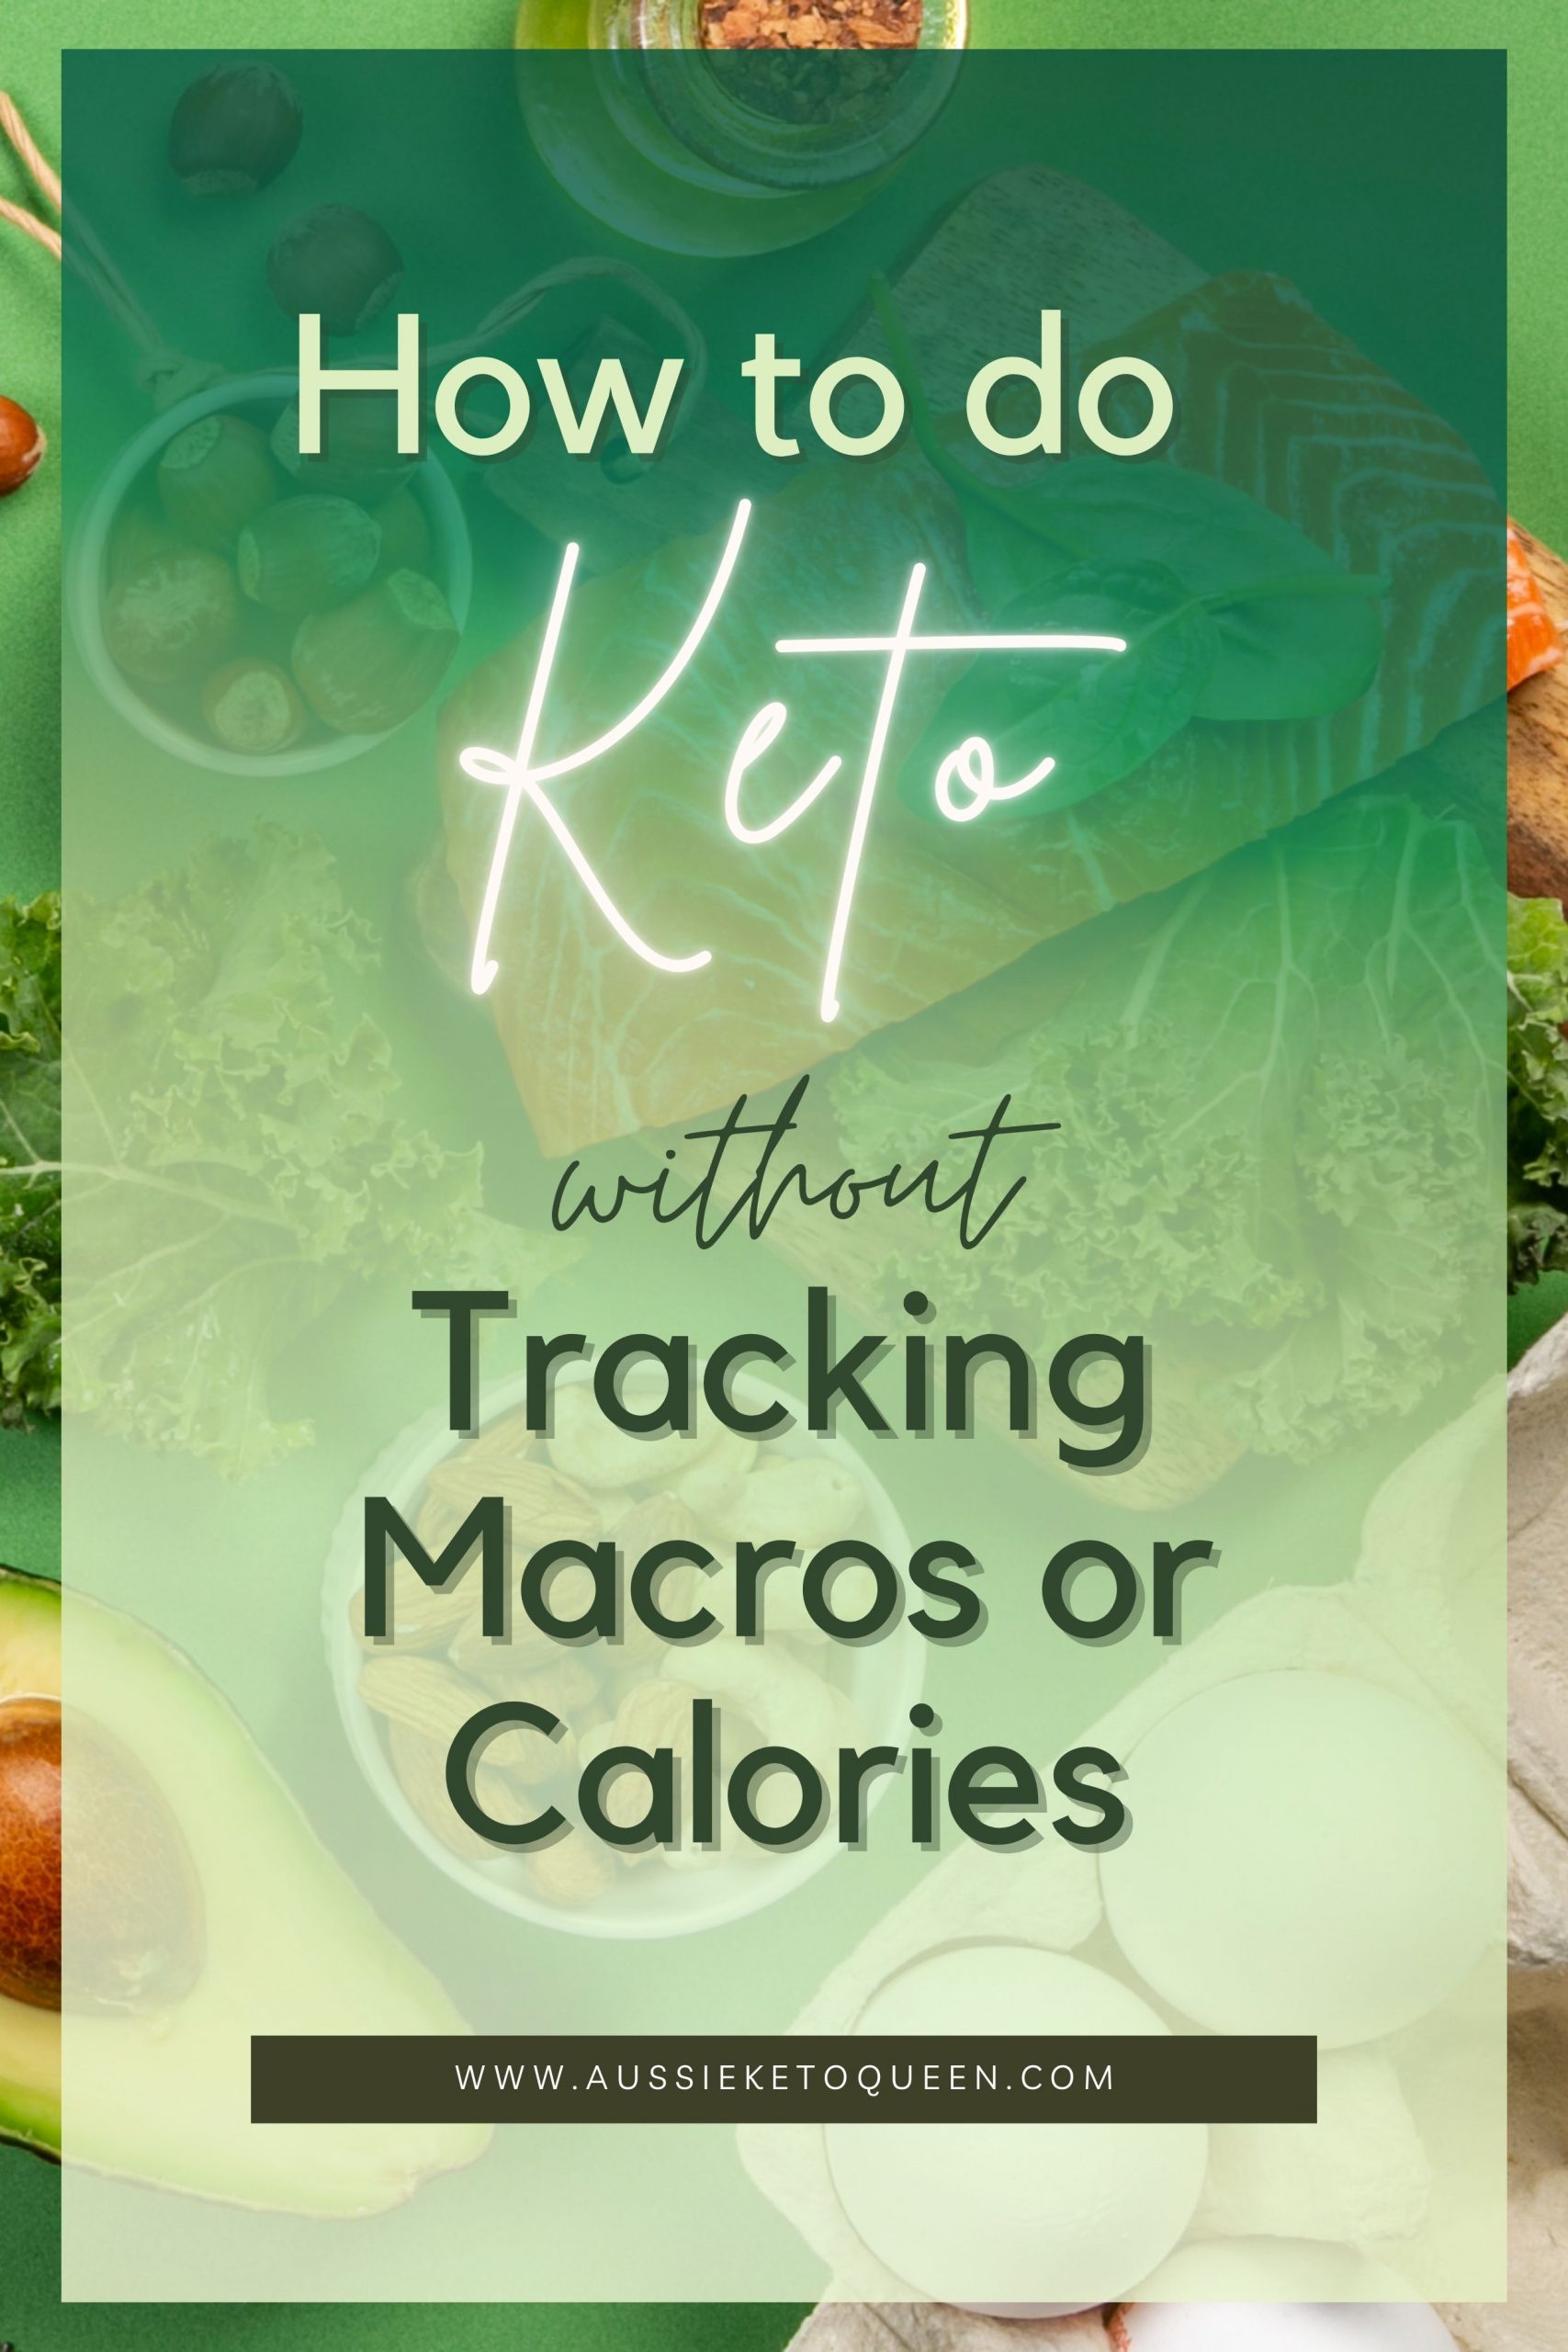 How to do Keto without Tracking Macros or Calories